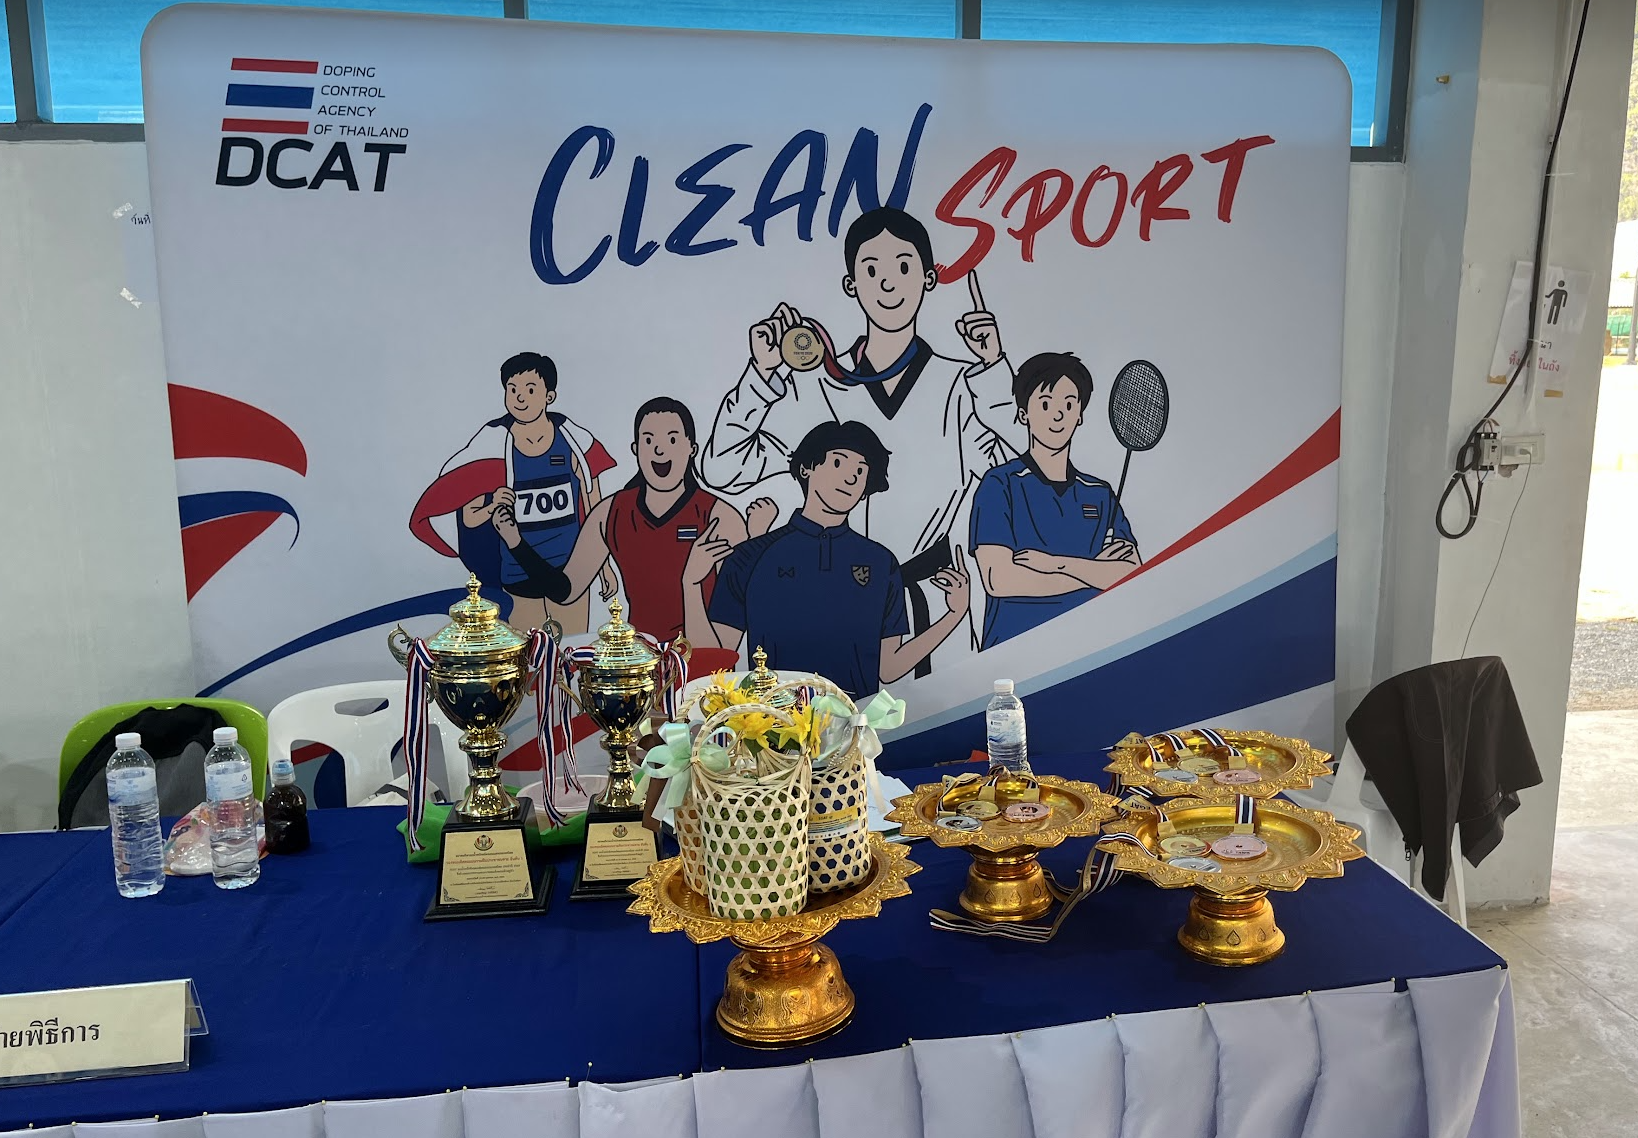 Clean sport is the message at the EGAT Kings Cup in Thailand ©TAWA